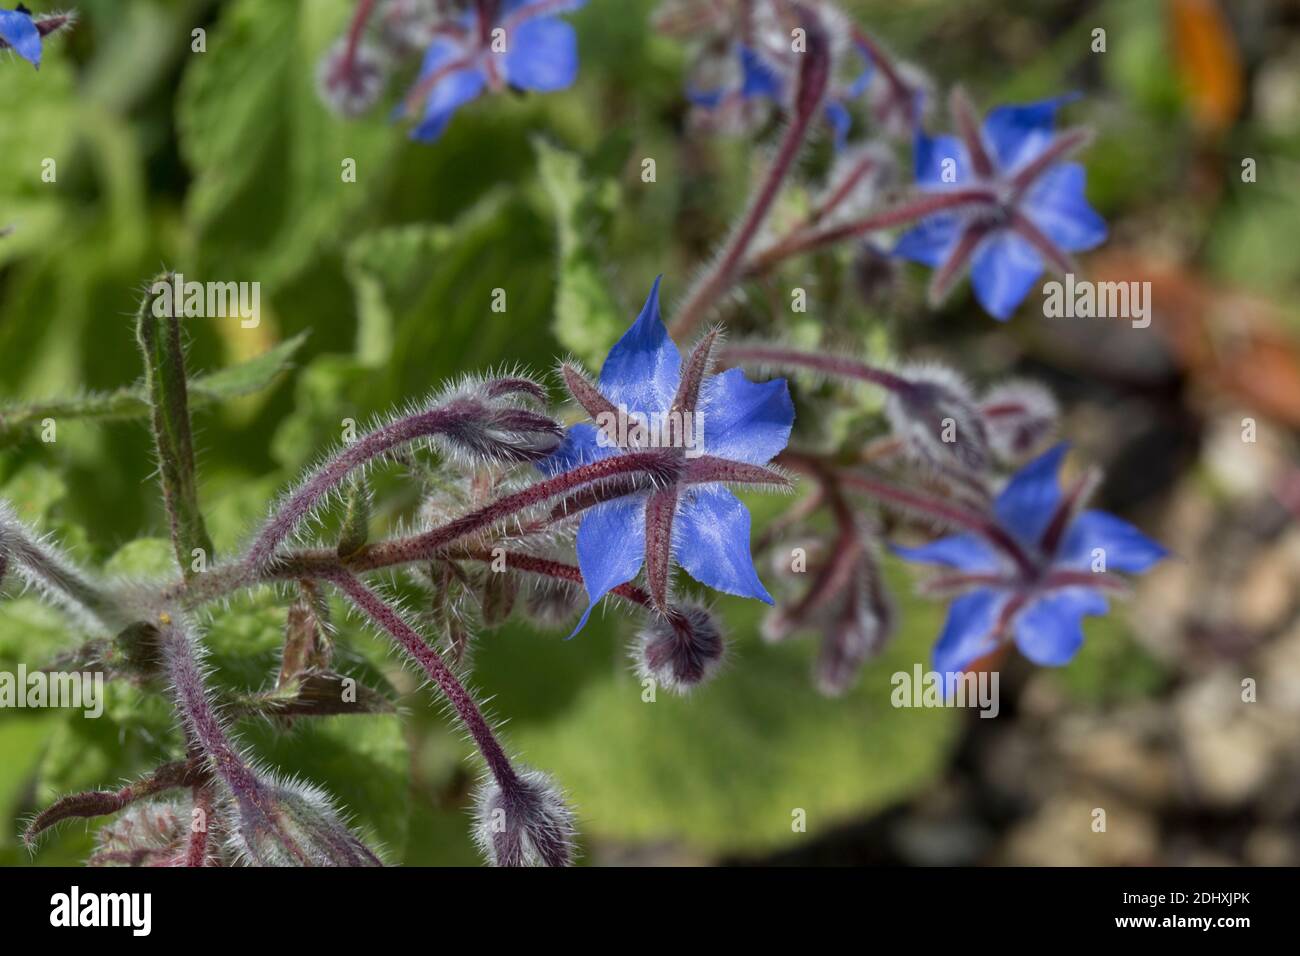 Borage flowers sometimes called star flower Borago officinalis is a medicinal herb with edible leaves and flowers Stock Photo